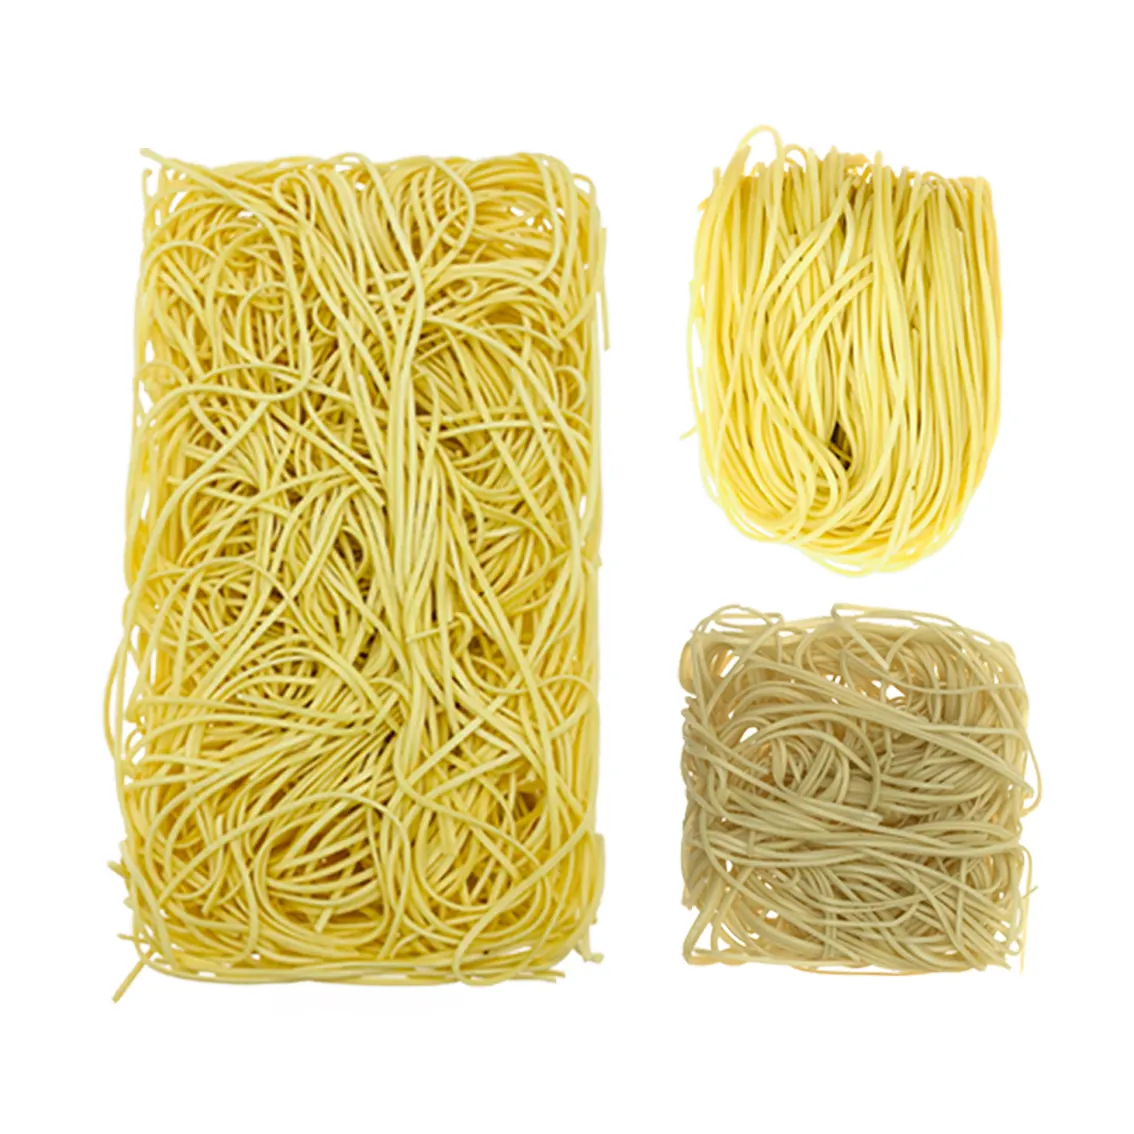 Wholesale Chinese Food Manufacturers Stir Fried Noodle Chuka Soba Chow Mein Noodles